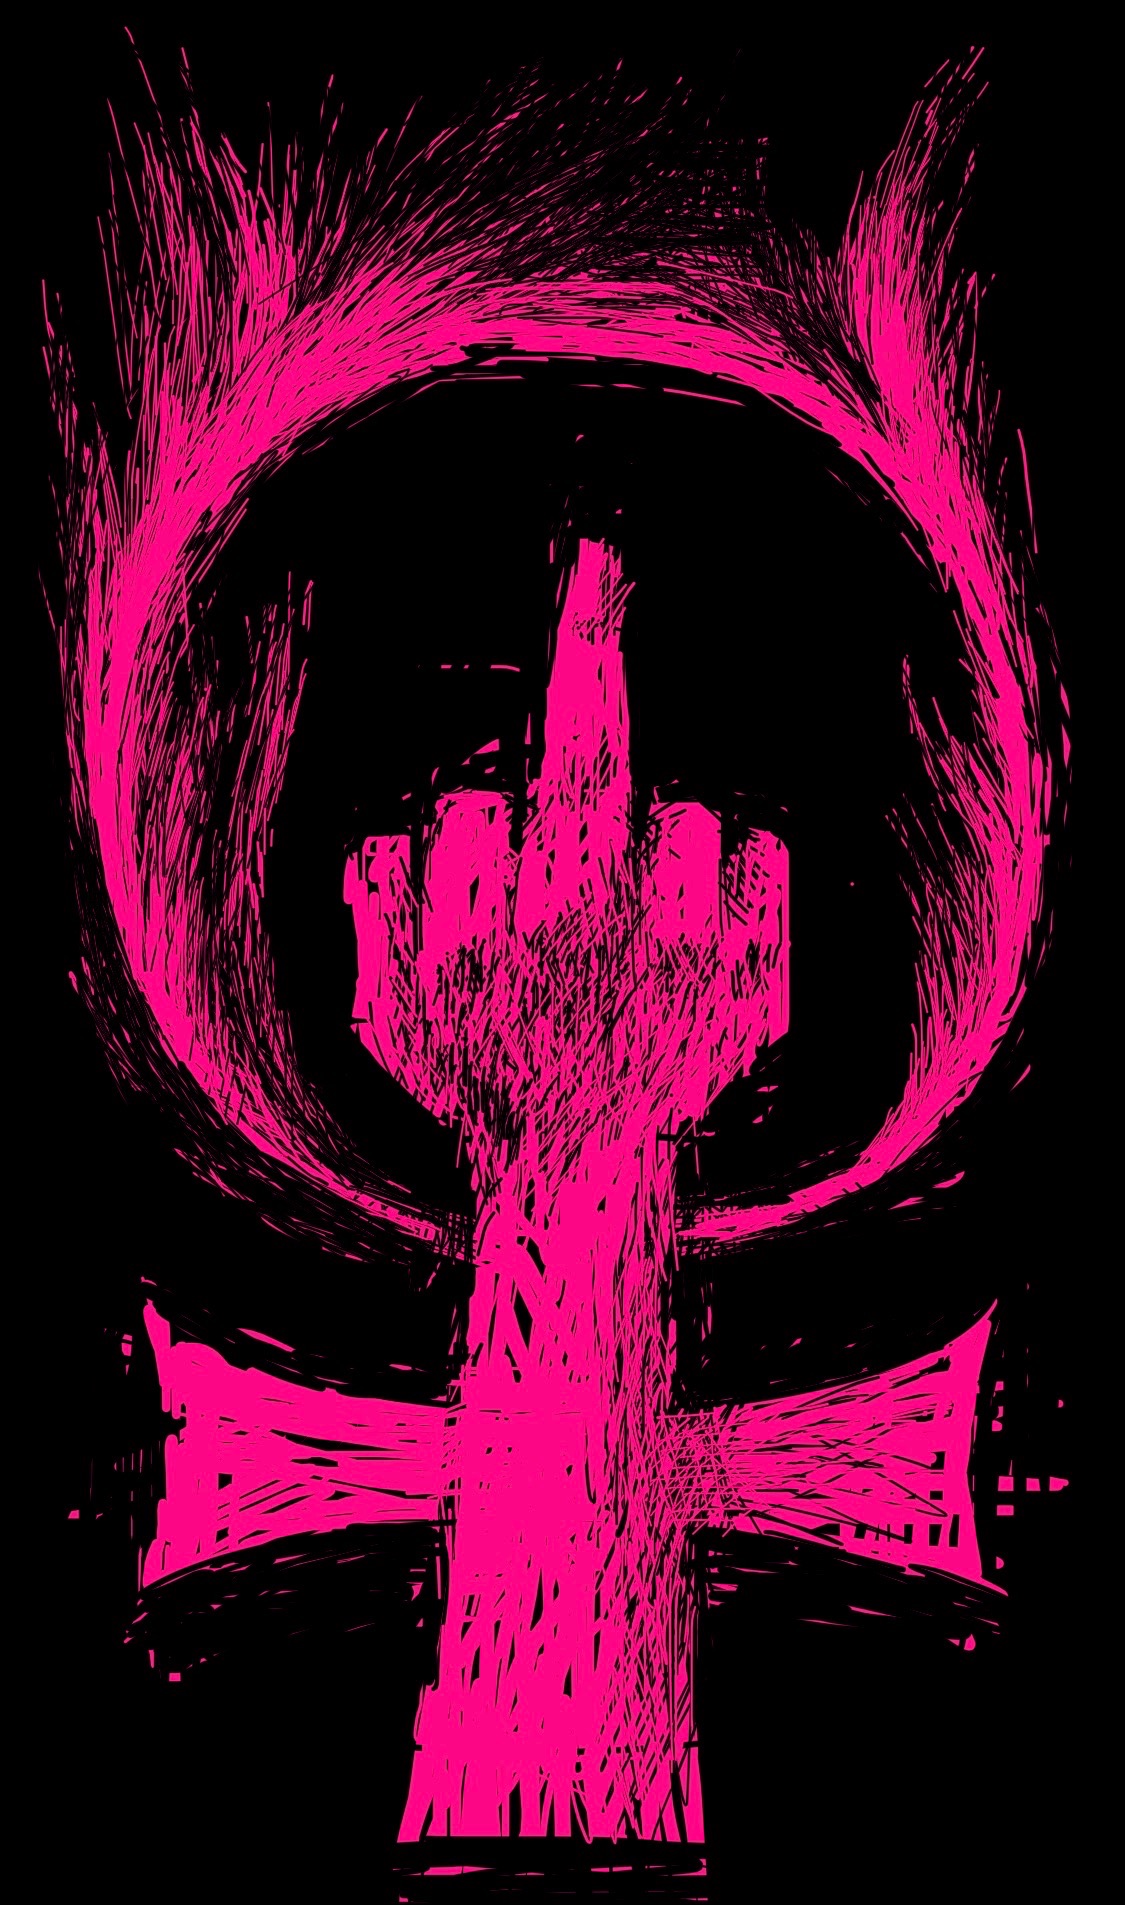 A crimson hand giving the middle finger, surrounded by a flaming ring. The two combine to form the "woman" symbol.